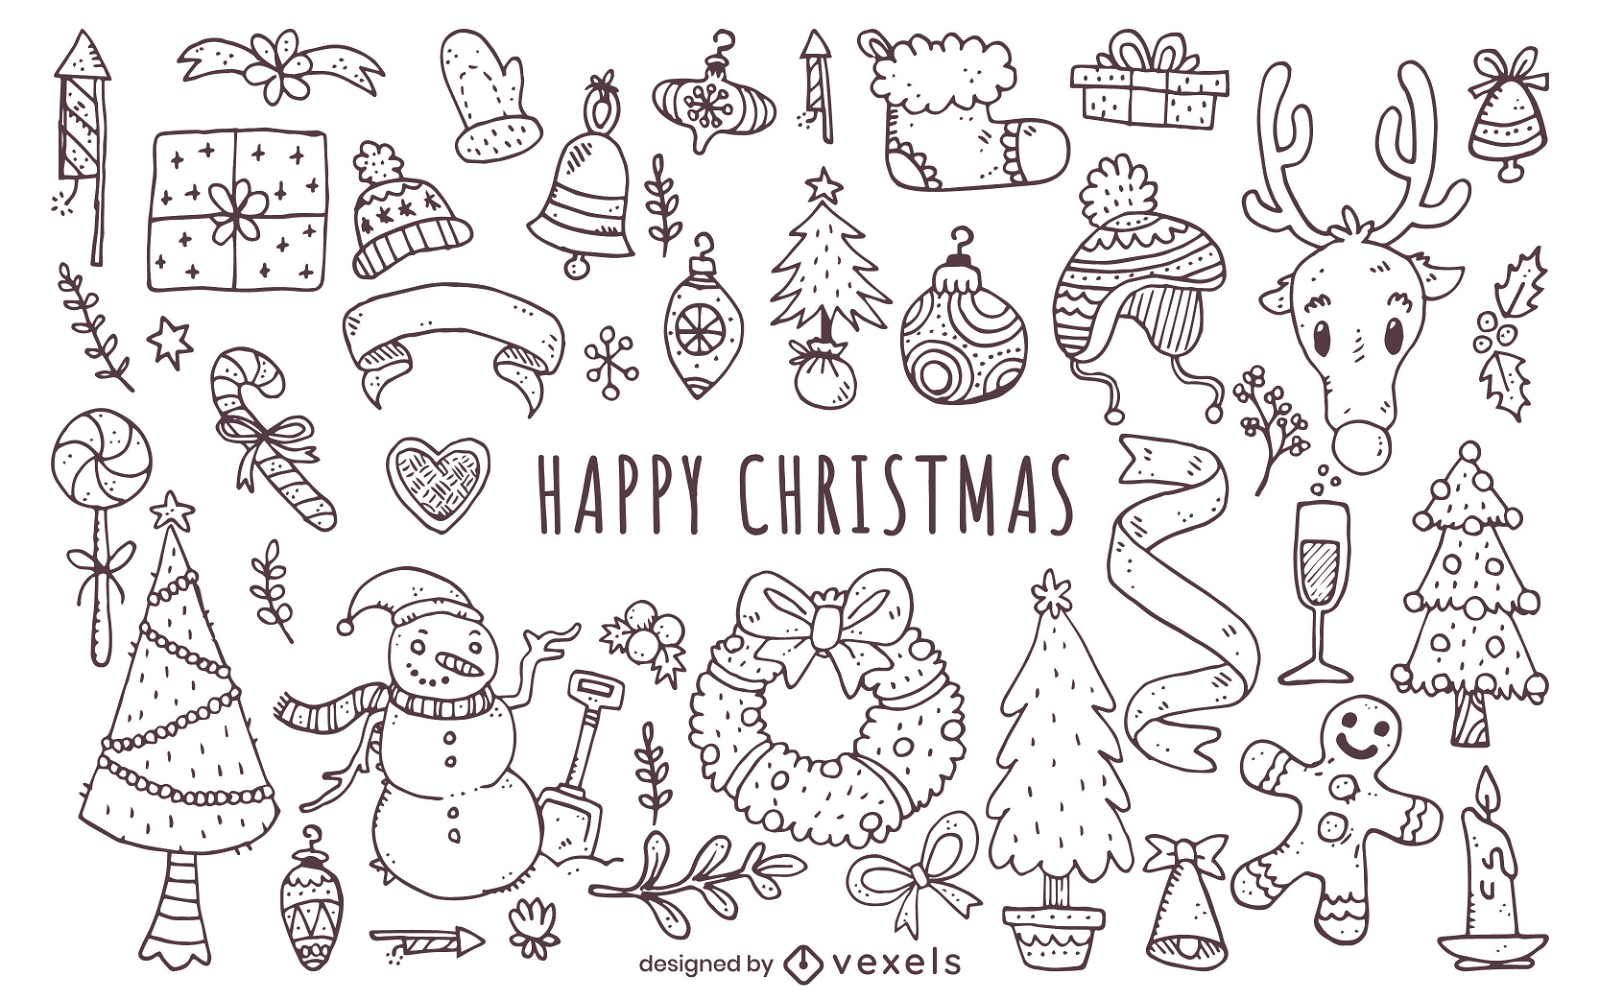 Christmas elements doodles collection